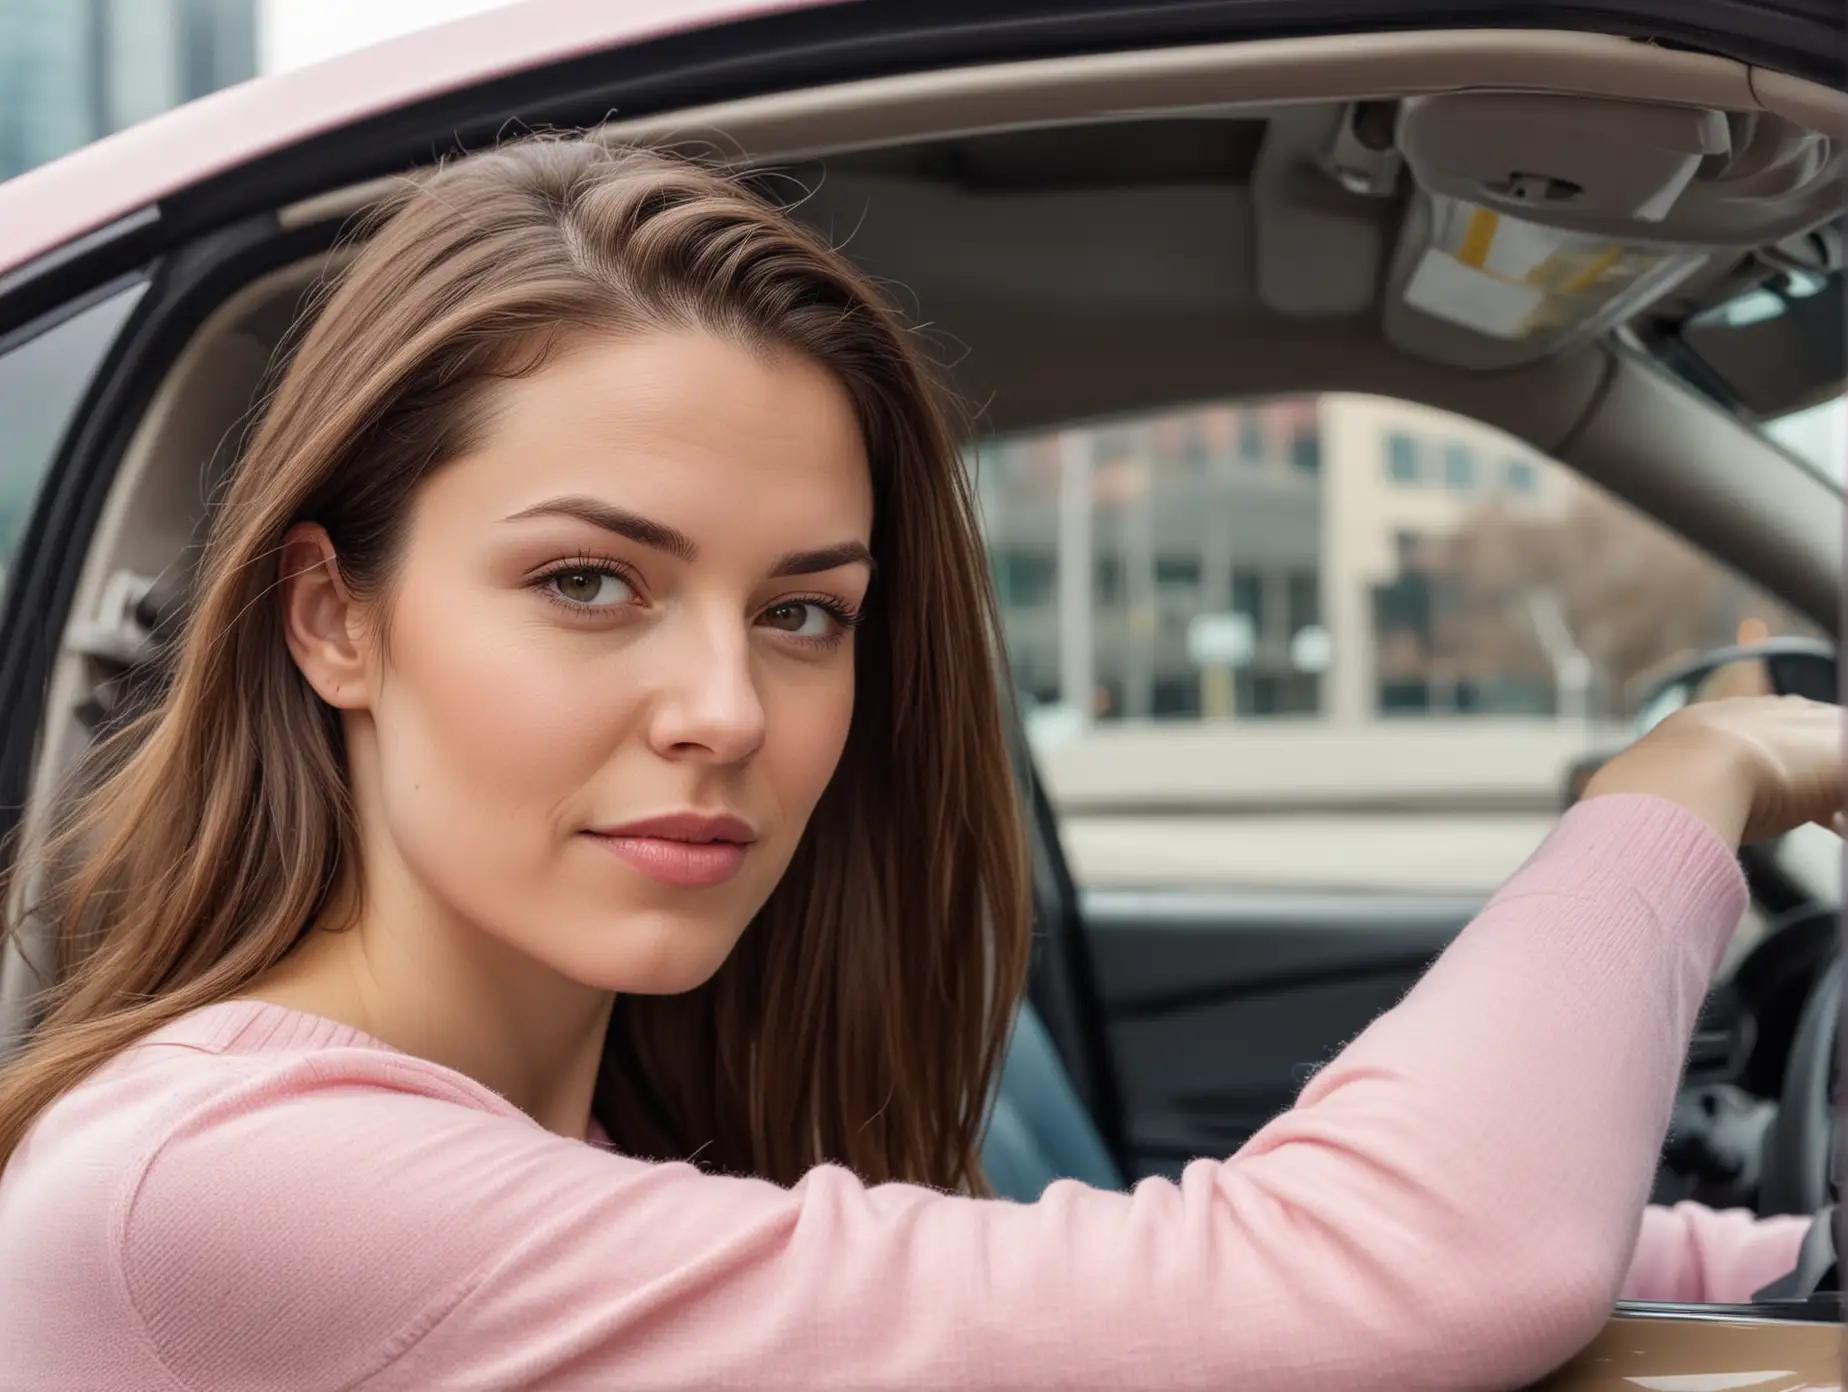 Closeup of 30 year old pale white woman with chocolate brown long hair parted to one side. She is wearing a pink sweater and blue jeans. She is behind the wheel of a modern gray hatchback, modern skyscraper setting